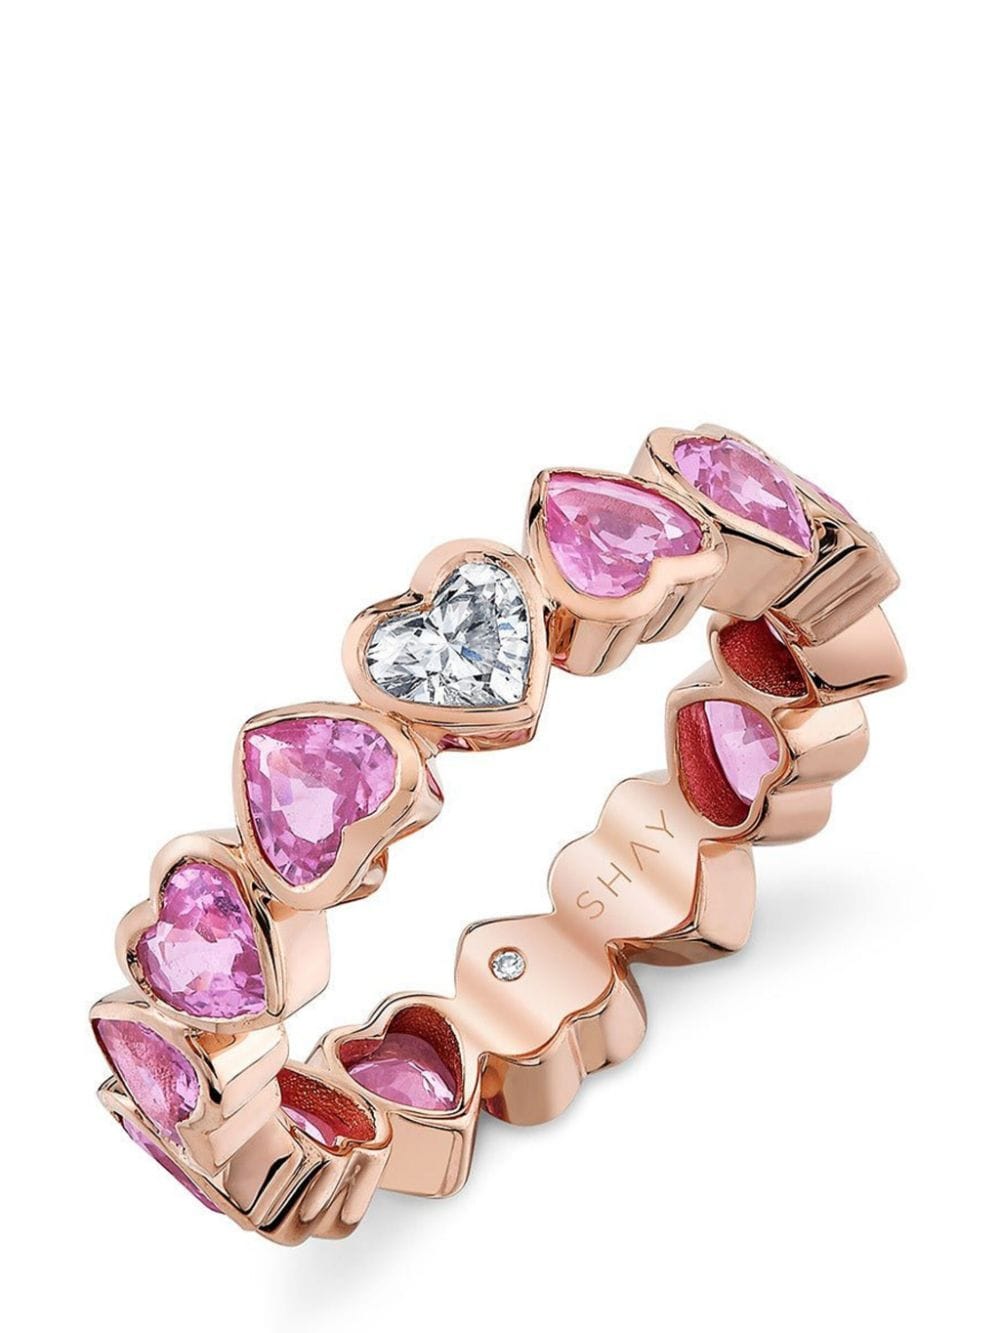 SHAY 18kt rose gold, pink sapphire and diamond heart ring von SHAY